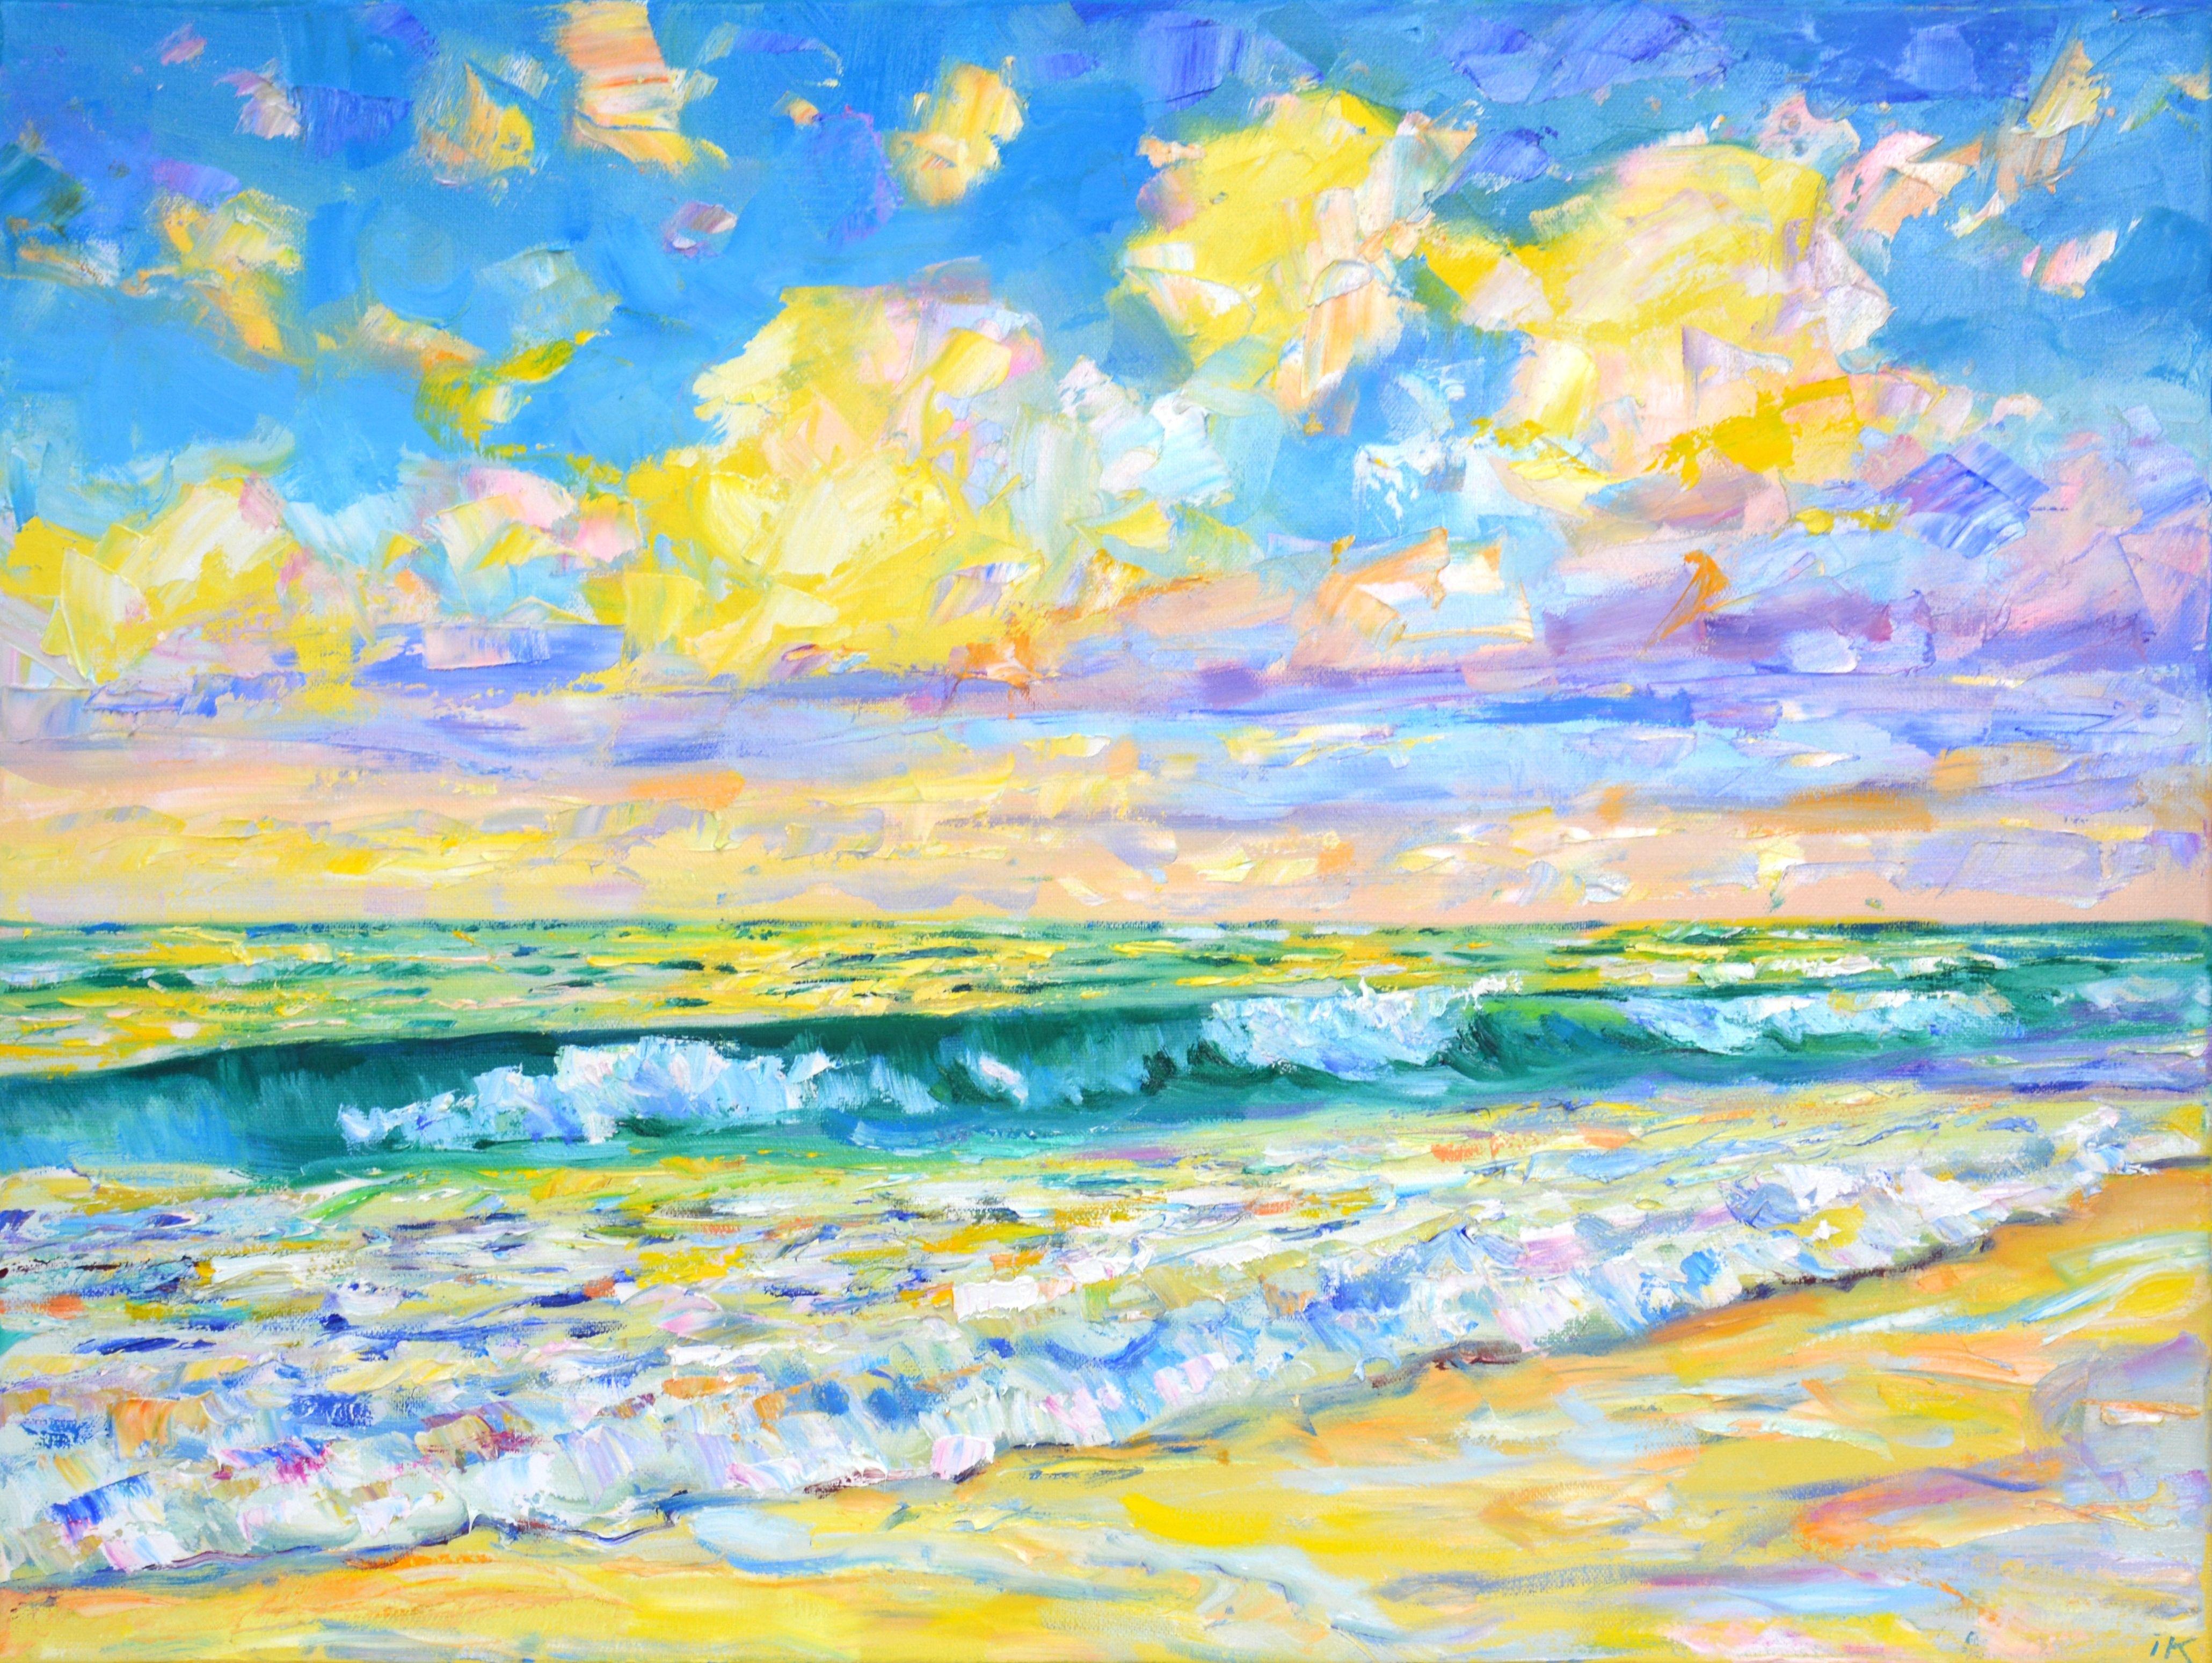 Sea mosaic. Sunny day at sea. A rigid palette of knives and a rich palette of turquoise, blue, yellow and white shades emphasize the warm radiance of the sun and the movement of water. Part of an ongoing series of seascapes that capture the luminous